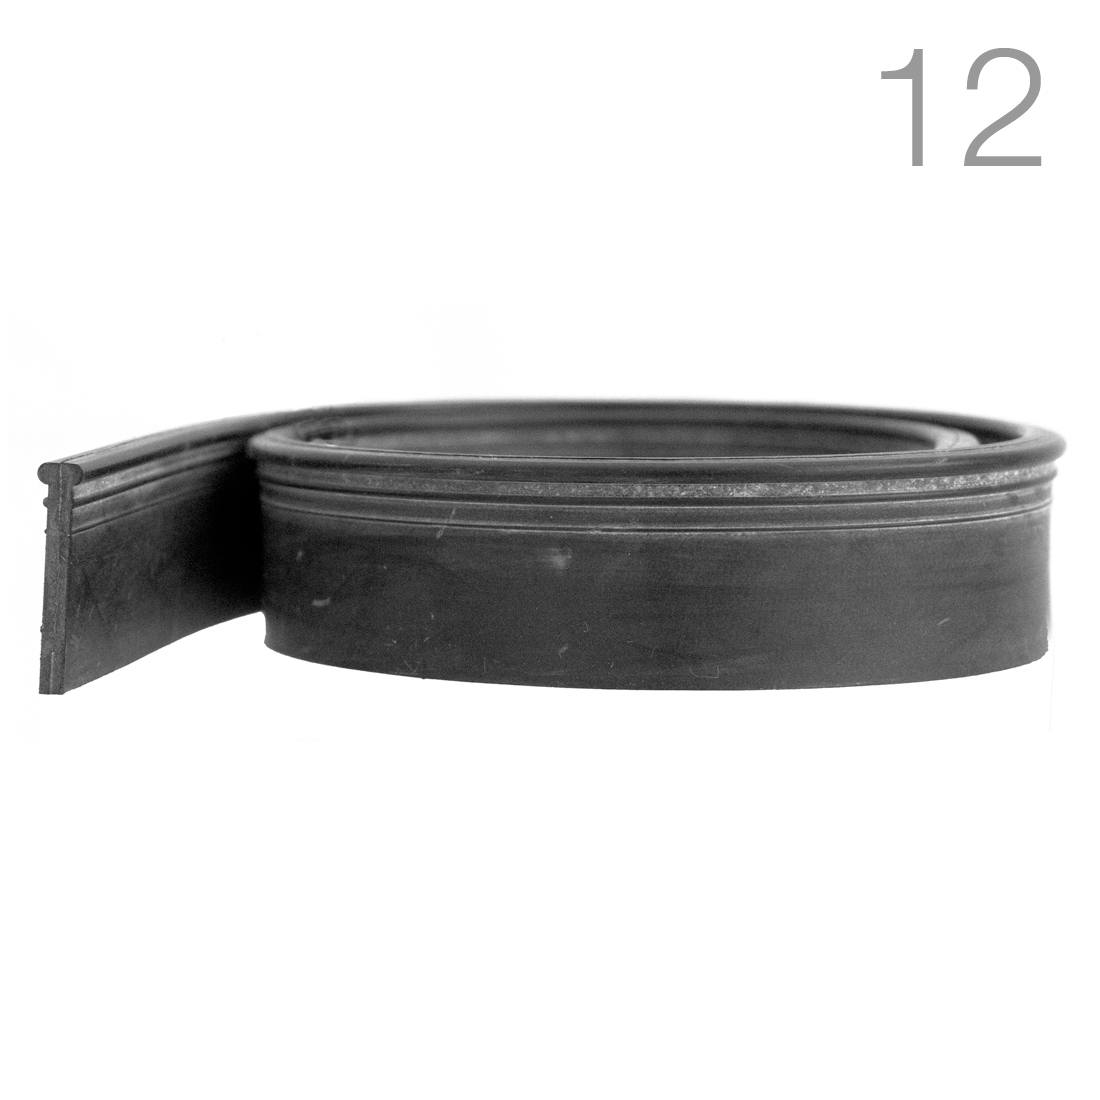 BlackDiamond Flat Top Squeegee Rubber - 12 Pack - Single Rubber - Number 12 - Rolled-up View